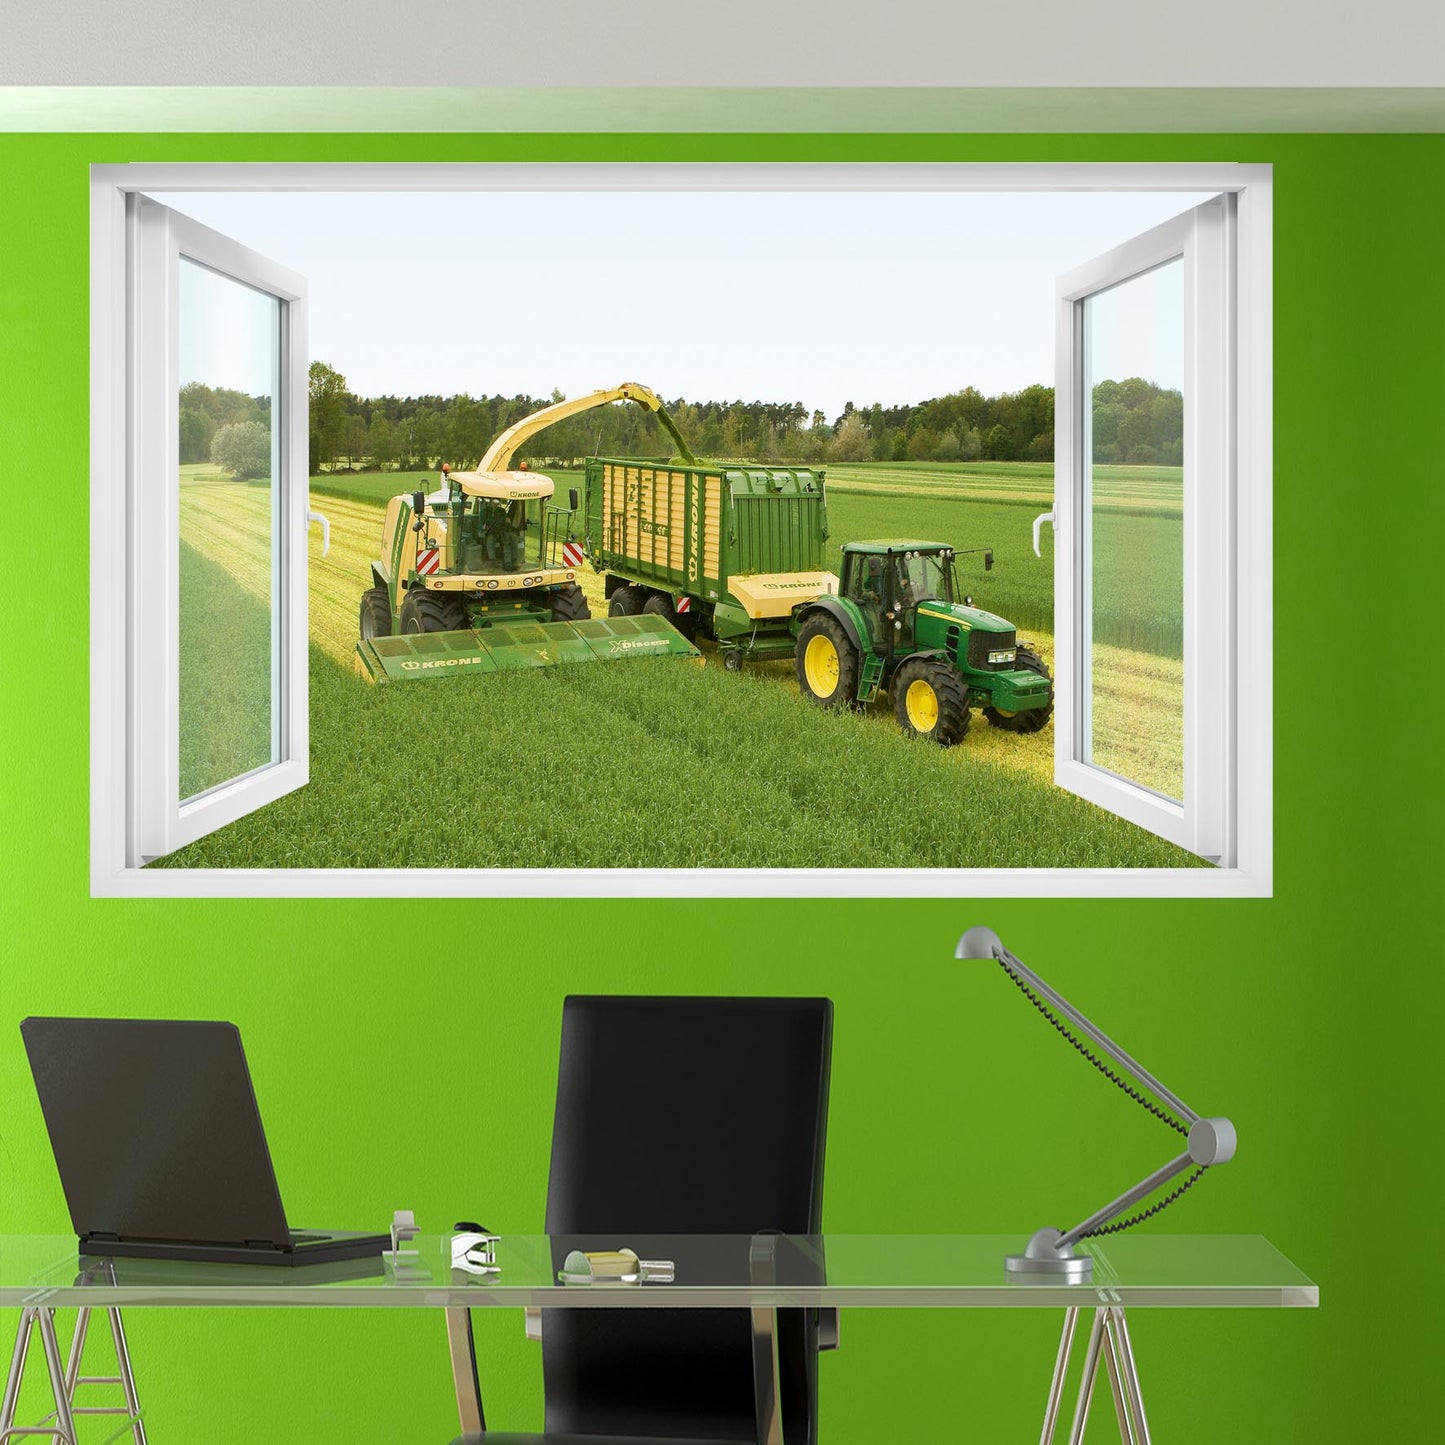 AGRICULTURAL MACHINERY KRONE AND JOHN DEERE TRACTOR COMBINE HARVESTER WALL STICKER